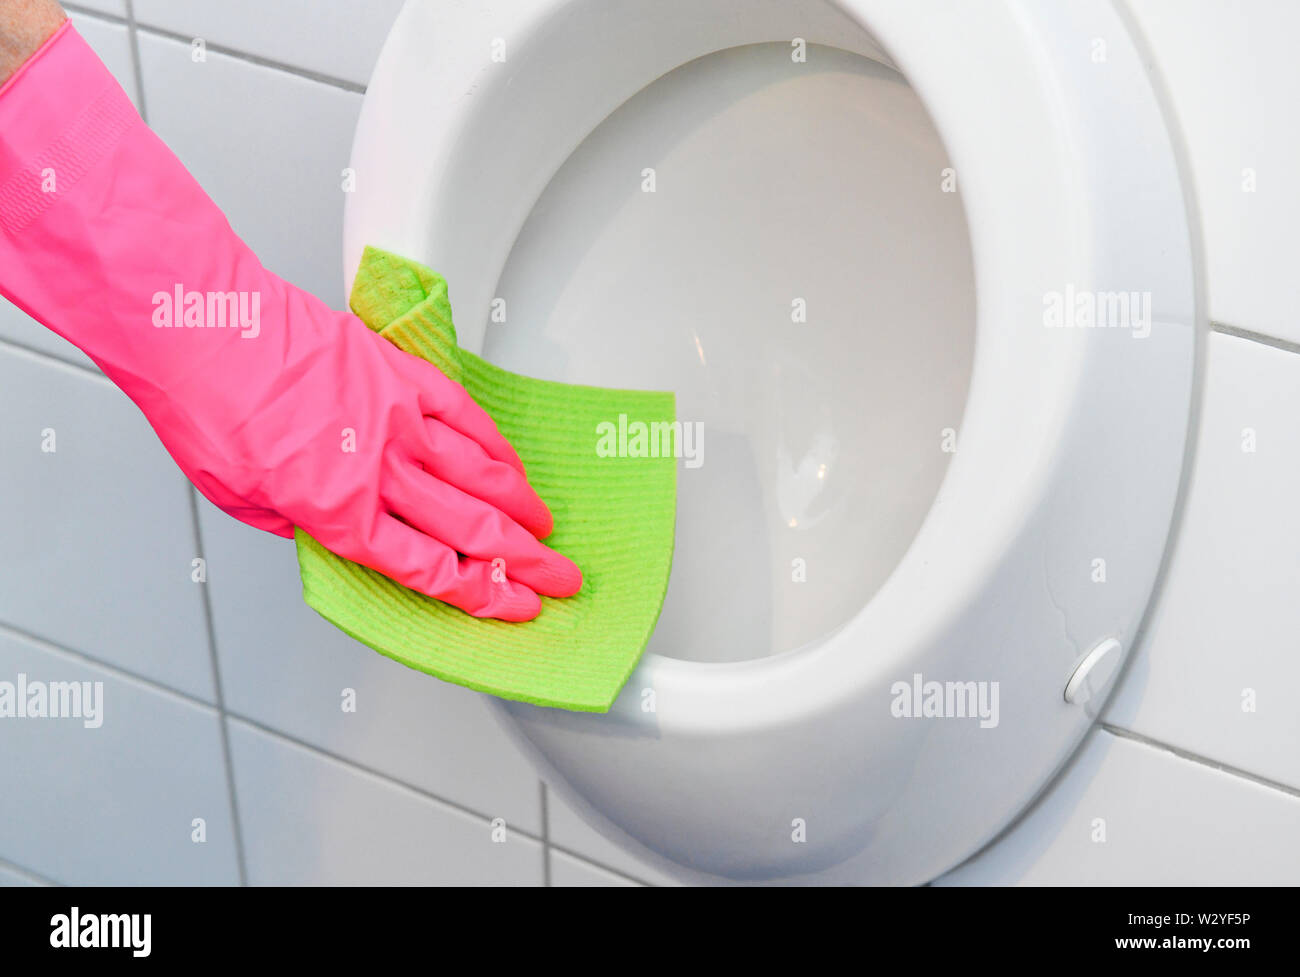 cleaning urinal Stock Photo